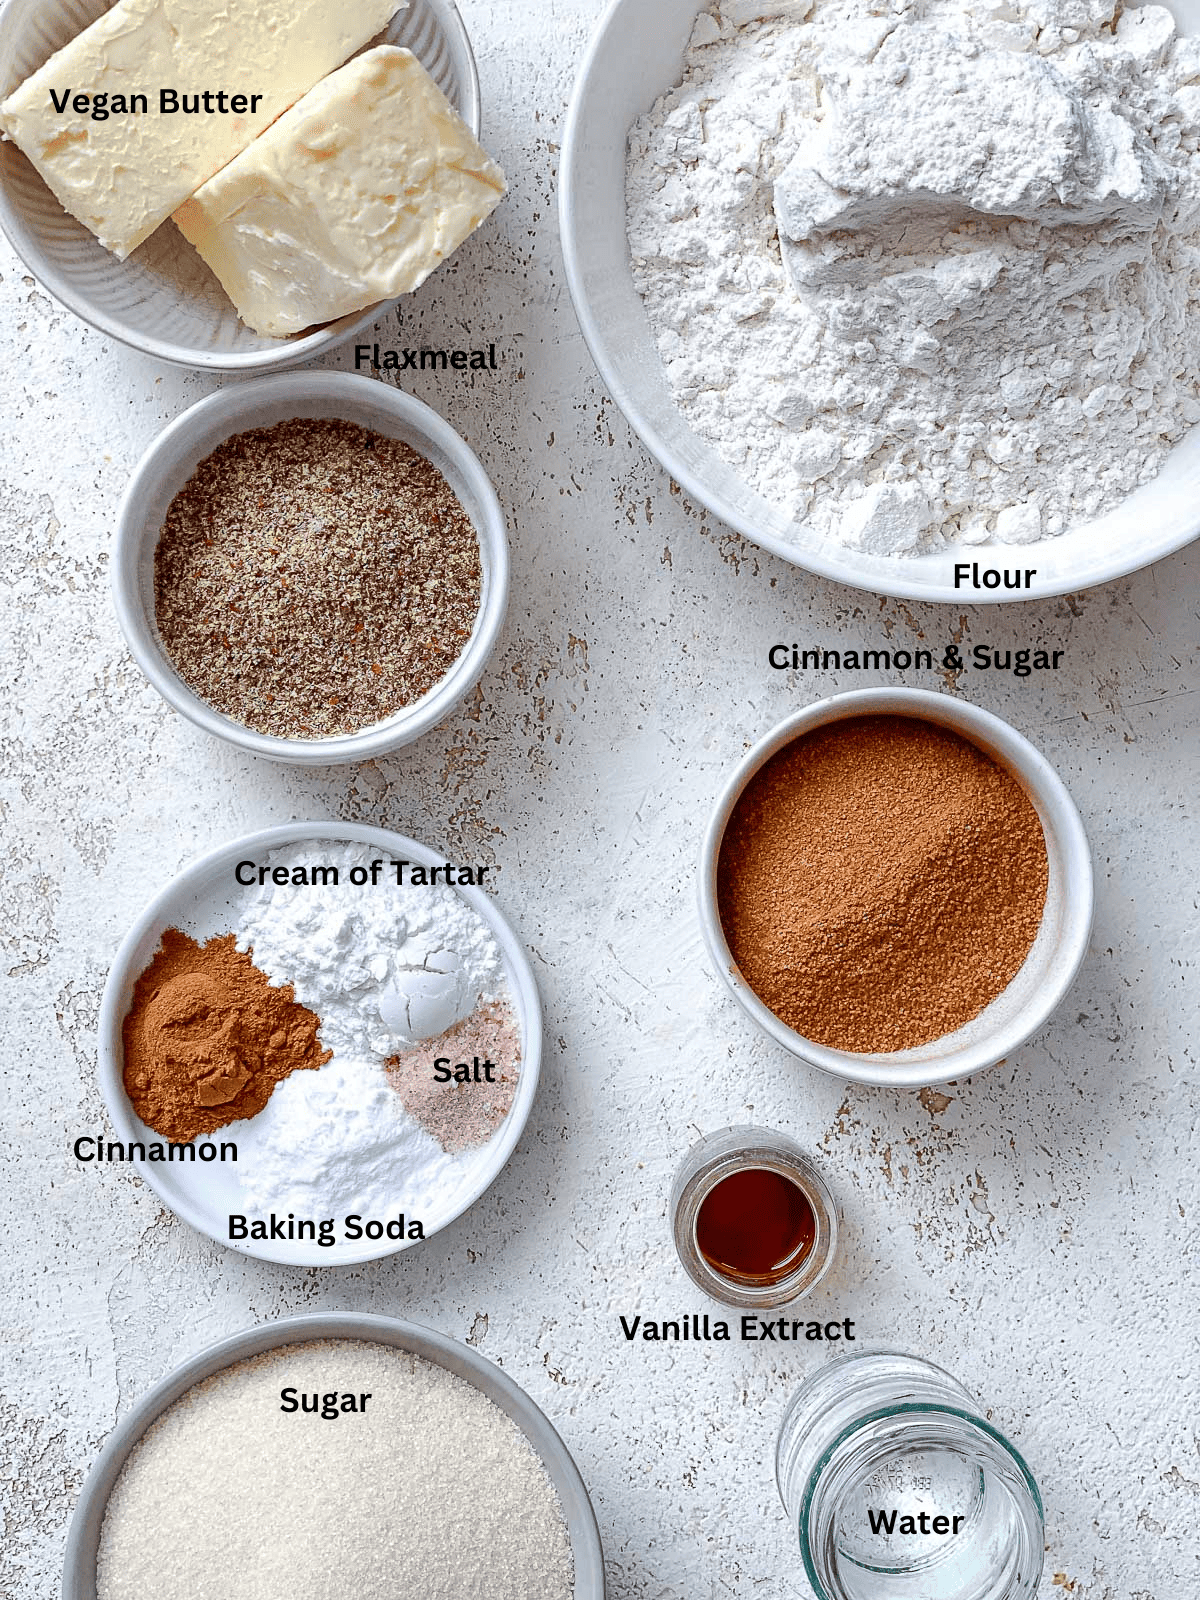 ingredients for Easy Vegan Snickerdoodles on a white surface